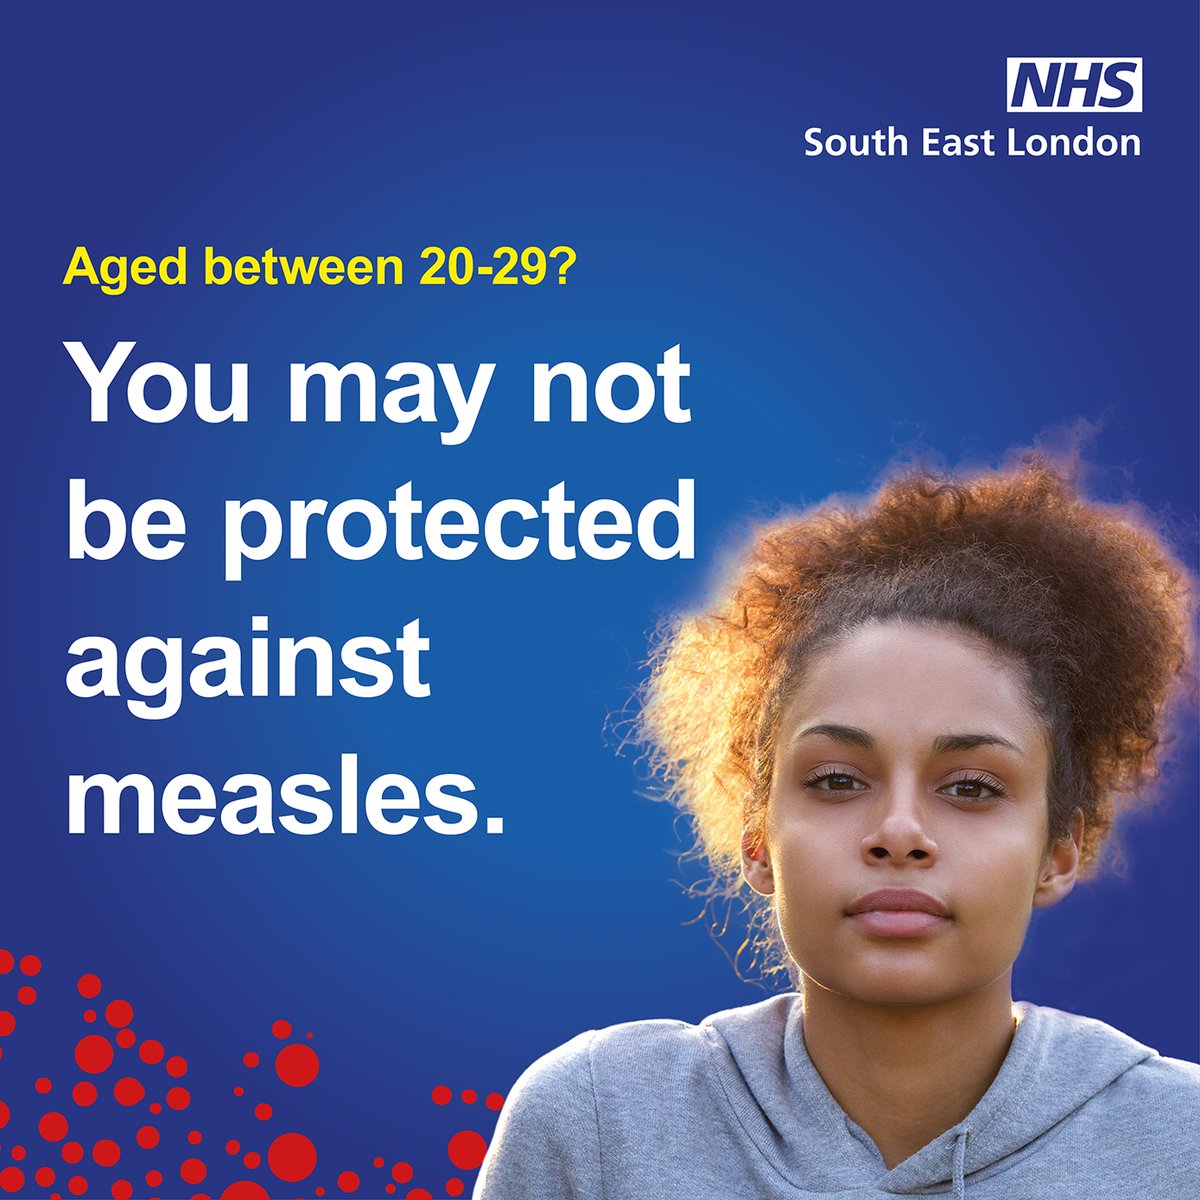 Londoners, measles cases are rising. Don’t take chances with your health. If you didn’t receive the MMR vaccine as a child, or you’re uncertain, act now. Plus, if you’re not registered with a GP, it’s free and easy. Find out more: nhs.uk/nhs-services/g…